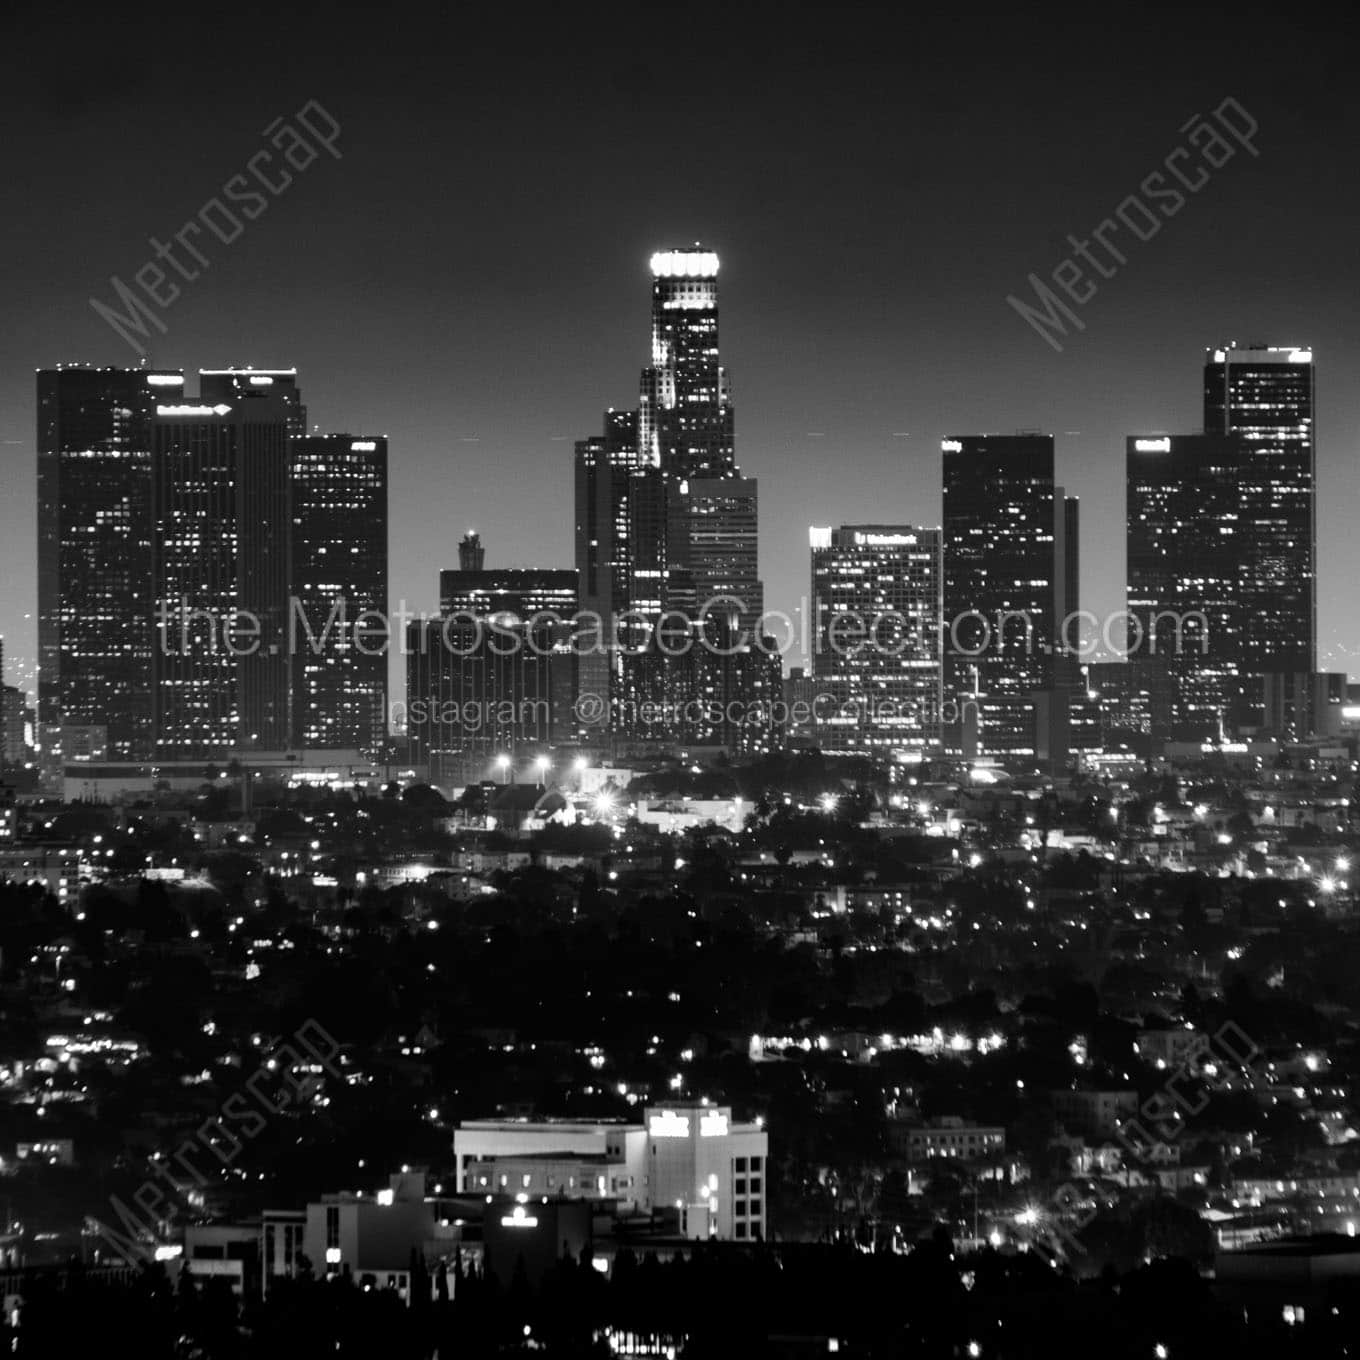 los angeles skyline from hollywood hills at night Black & White Wall Art